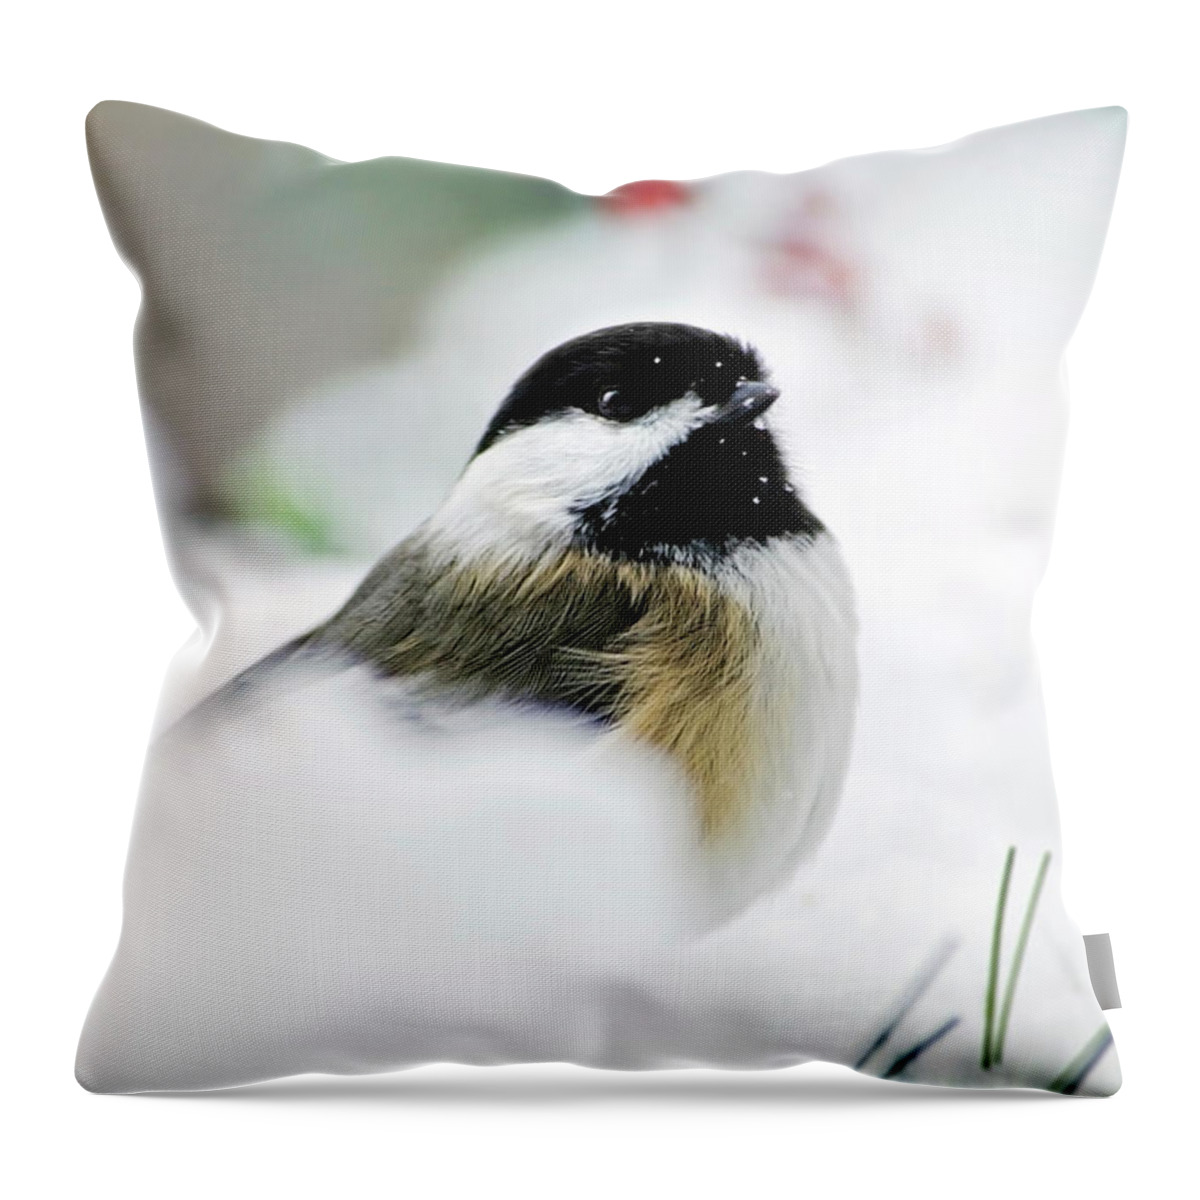 Chickadee Throw Pillow featuring the photograph White Winter Chickadee by Christina Rollo